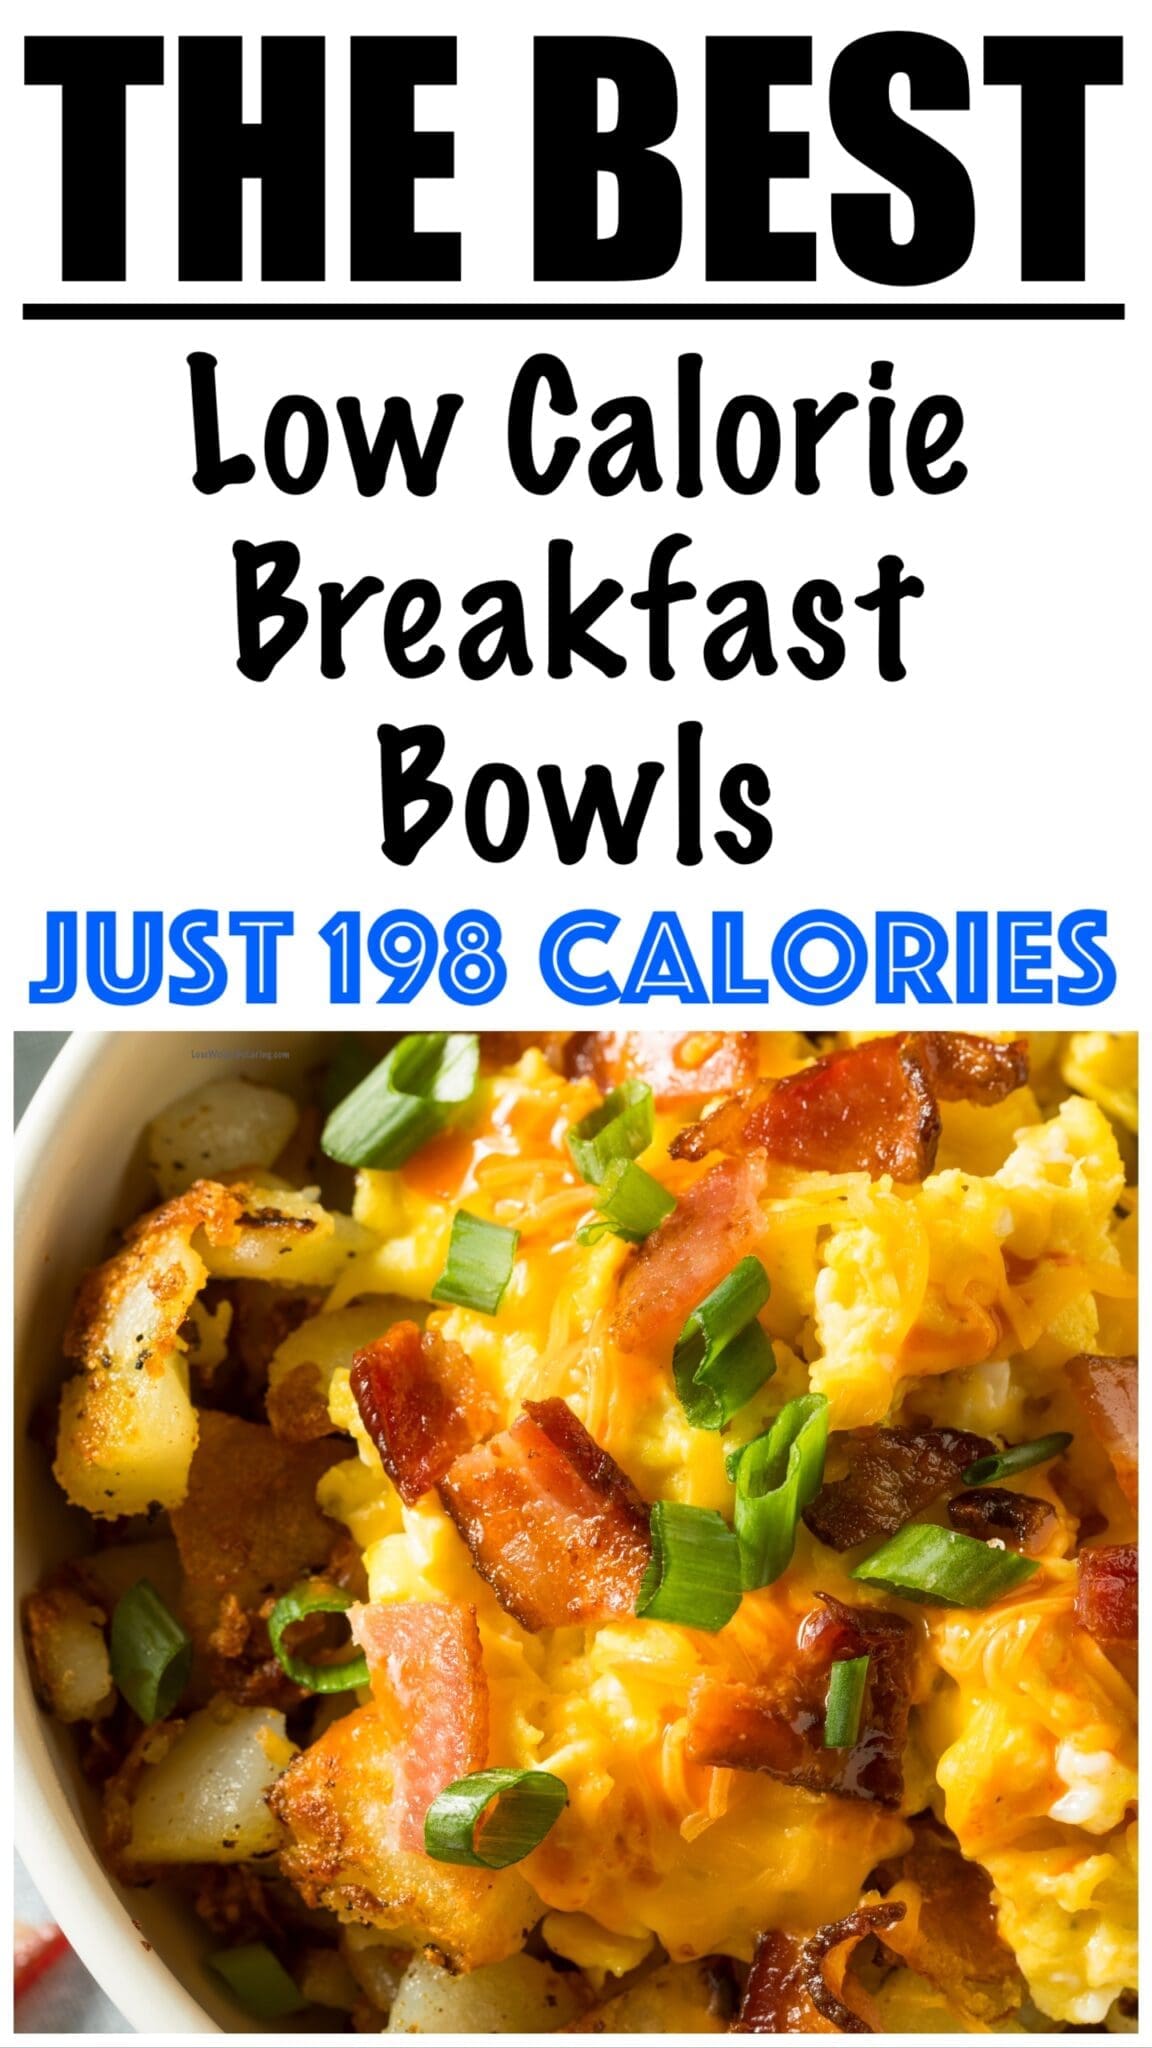 Healthy Breakfast Bowls - Lose Weight By Eating